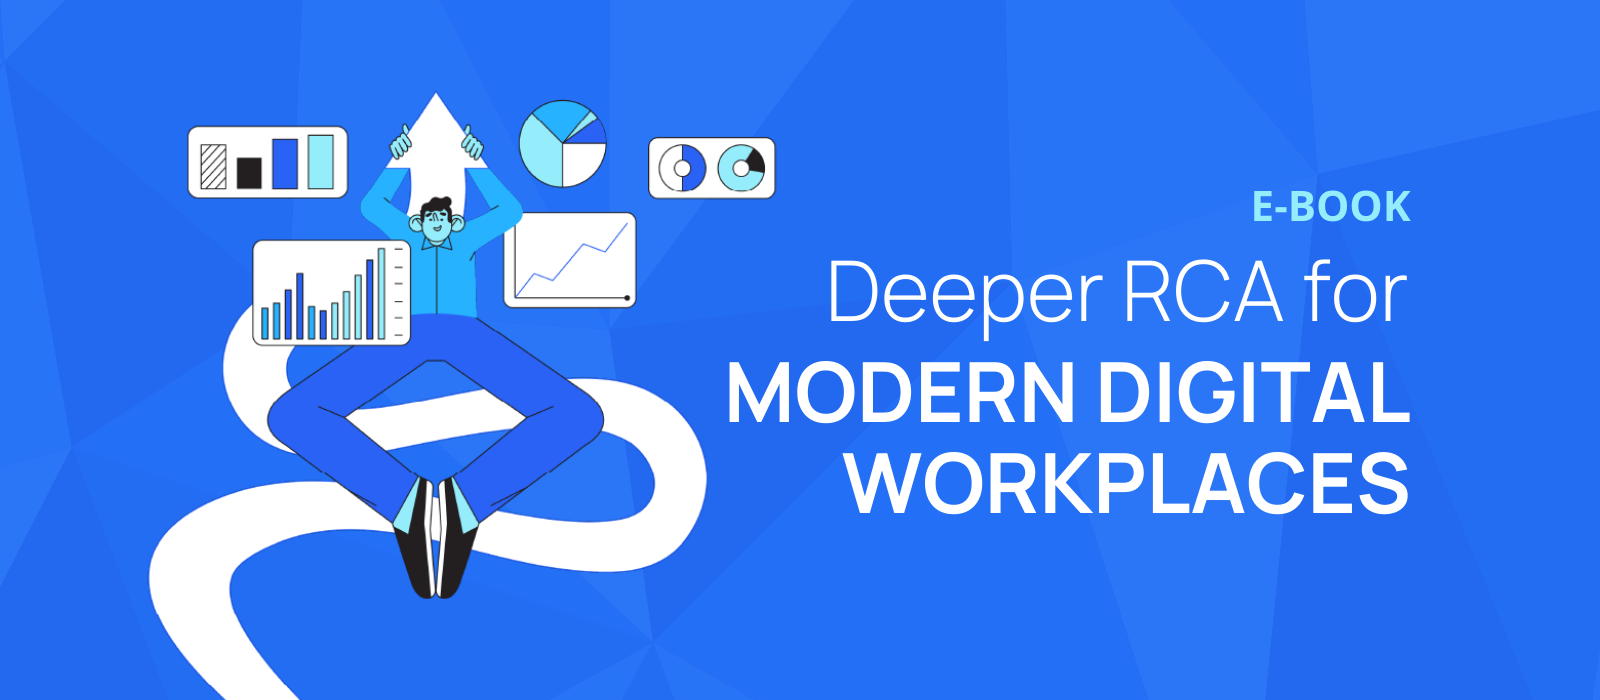 Graphic for the e-book titled "Deeper RCA for Modern Digital Workplaces."